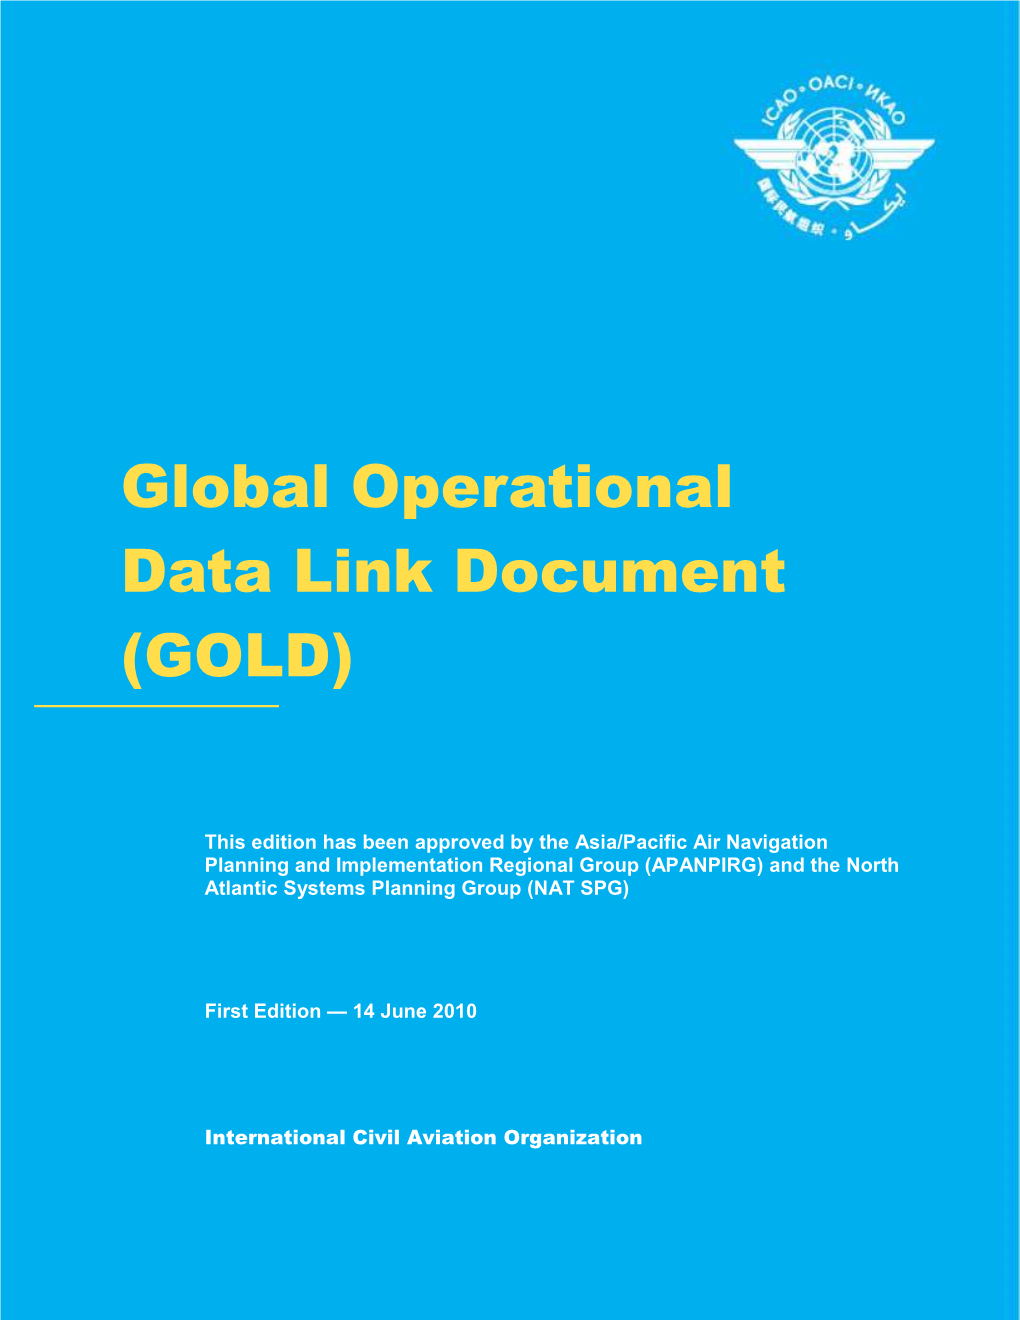 Global Operational Data Link Document (GOLD)